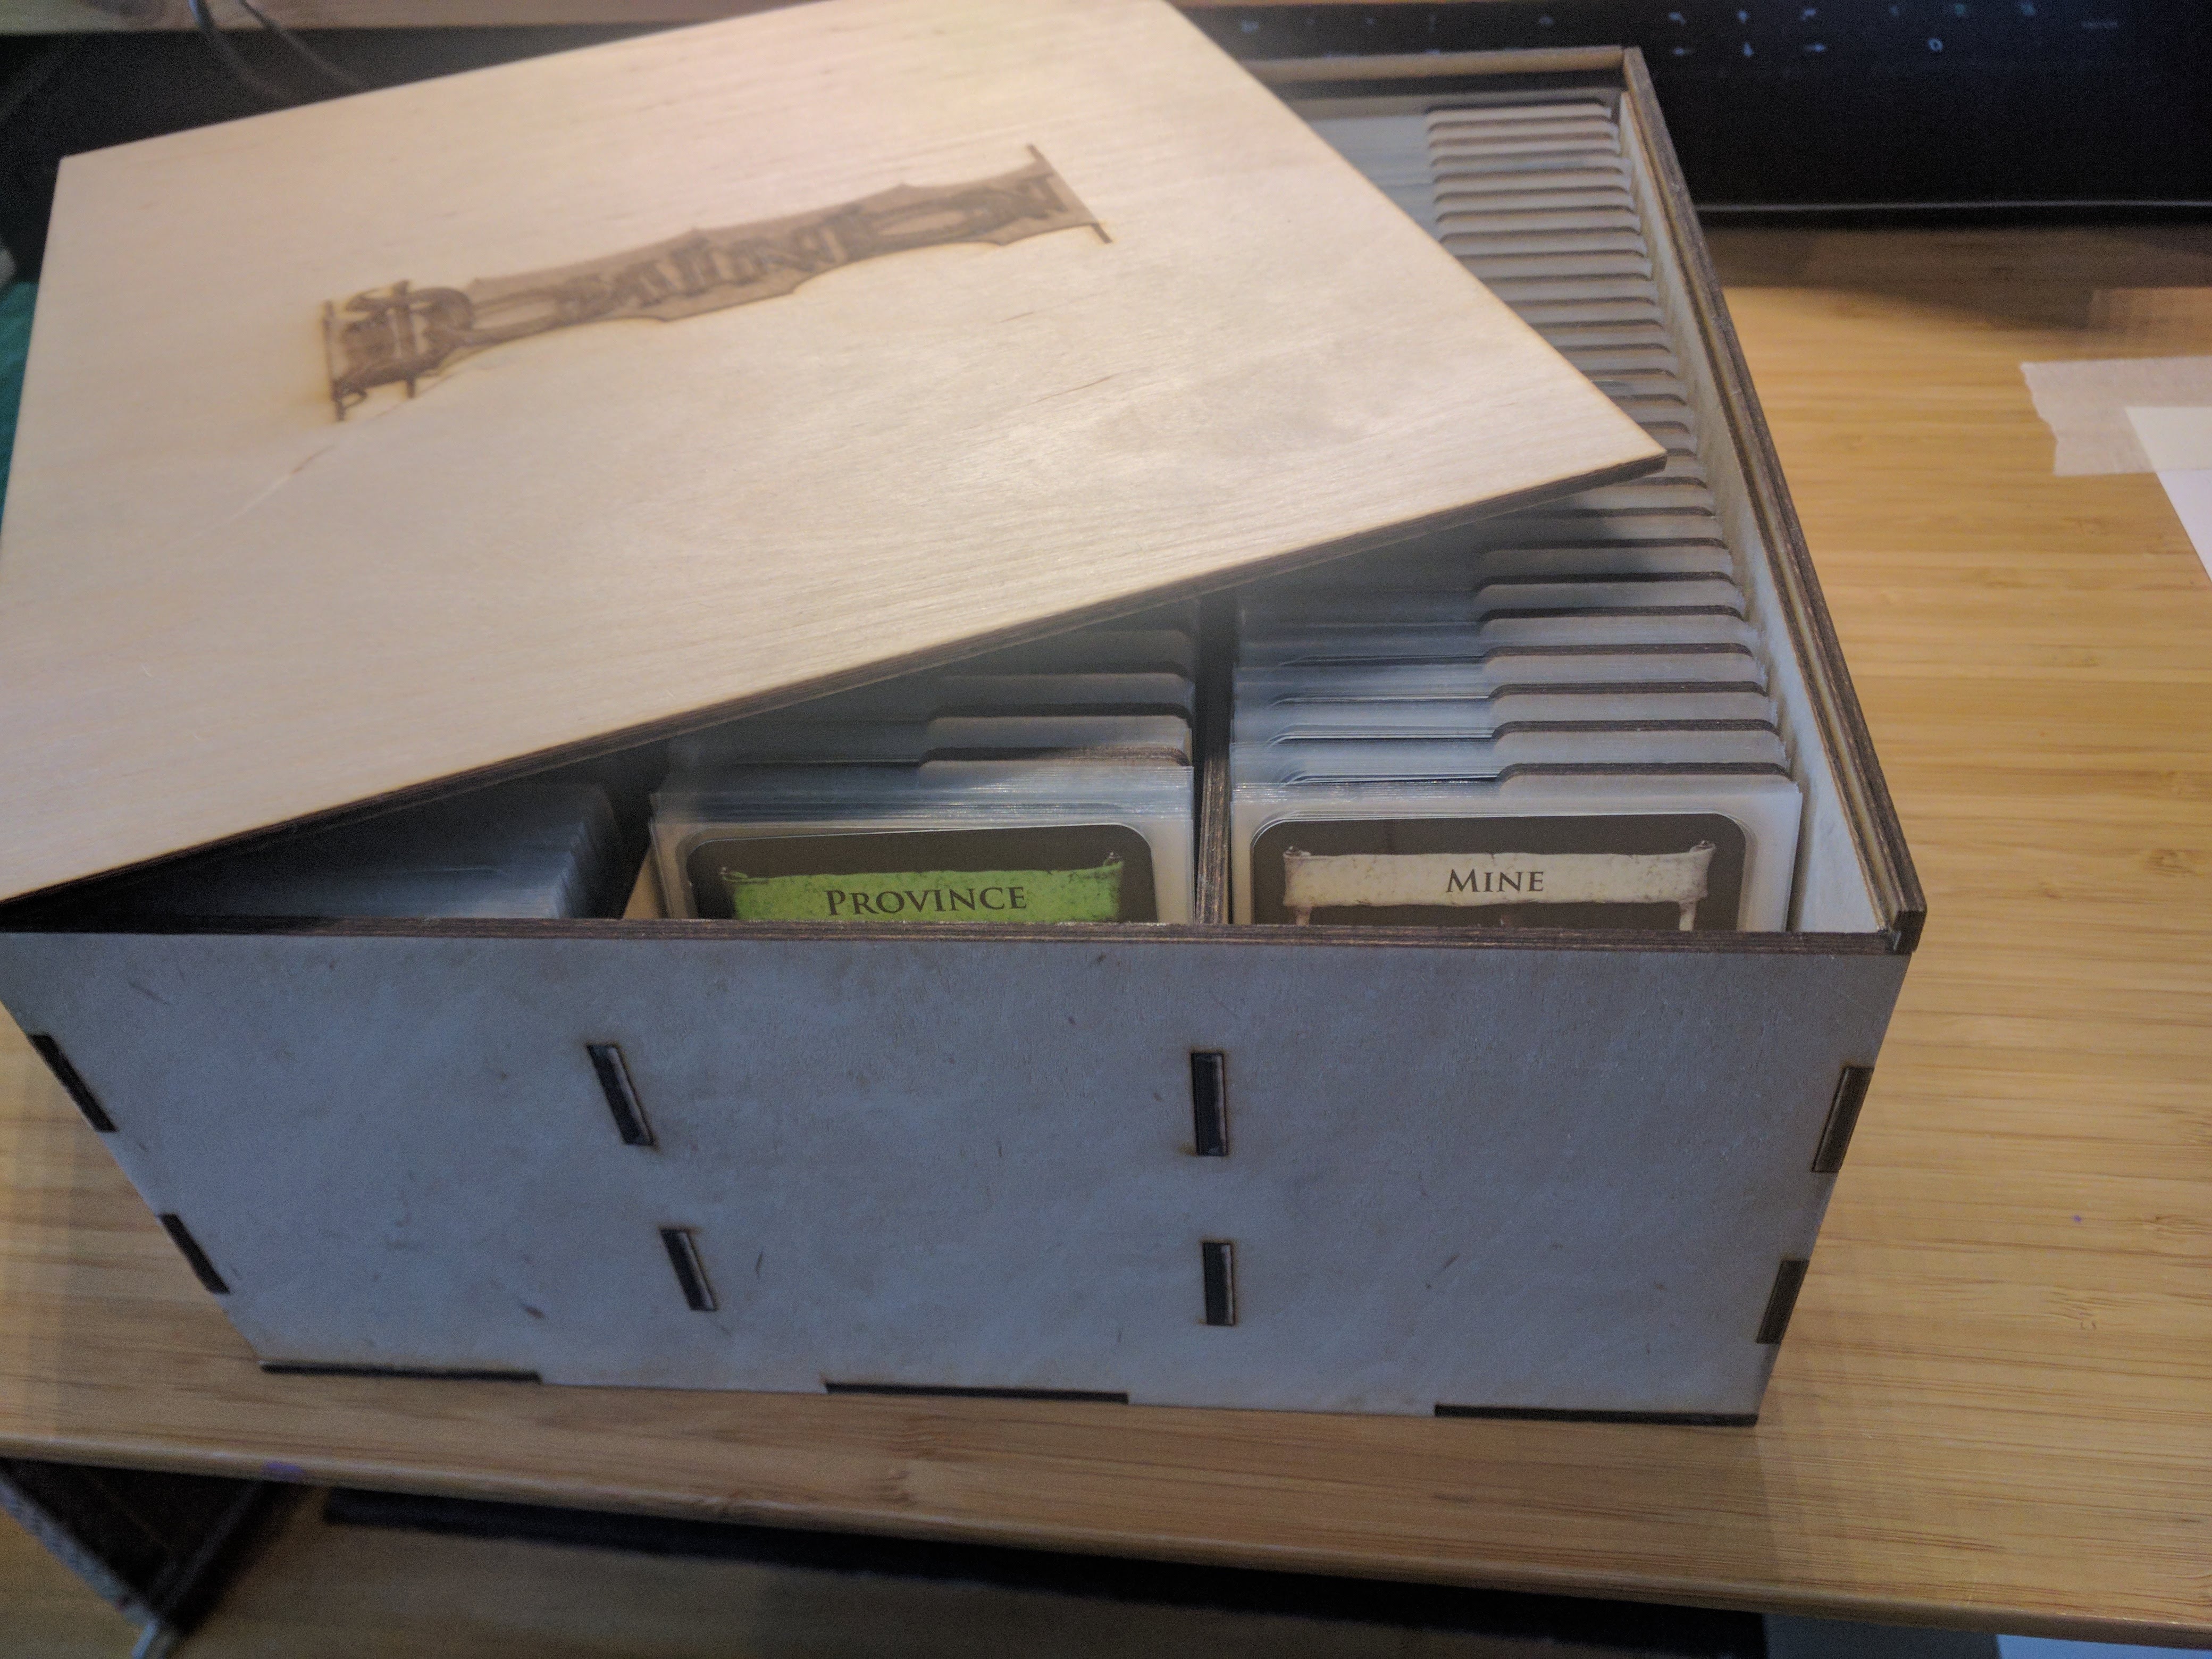 Box for Dominion cards with the lid closed